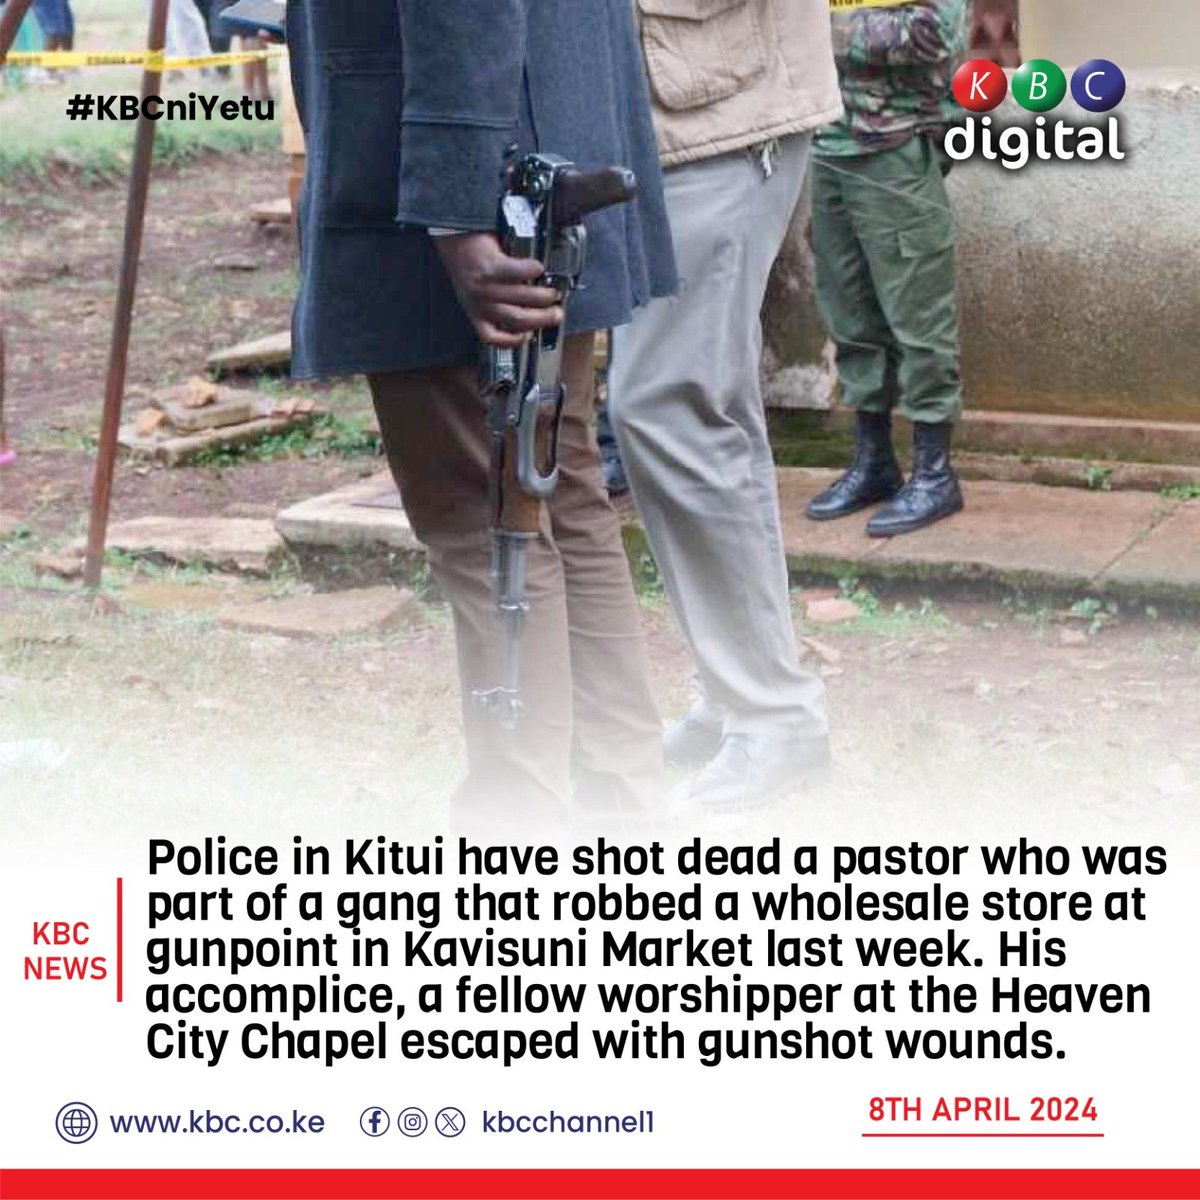 Police in Kitui have shot dead a pastor who was part of a gang that robbed a wholesale store at gunpoint in Kavisuni Market last week.
#KBCniYetu ^RO